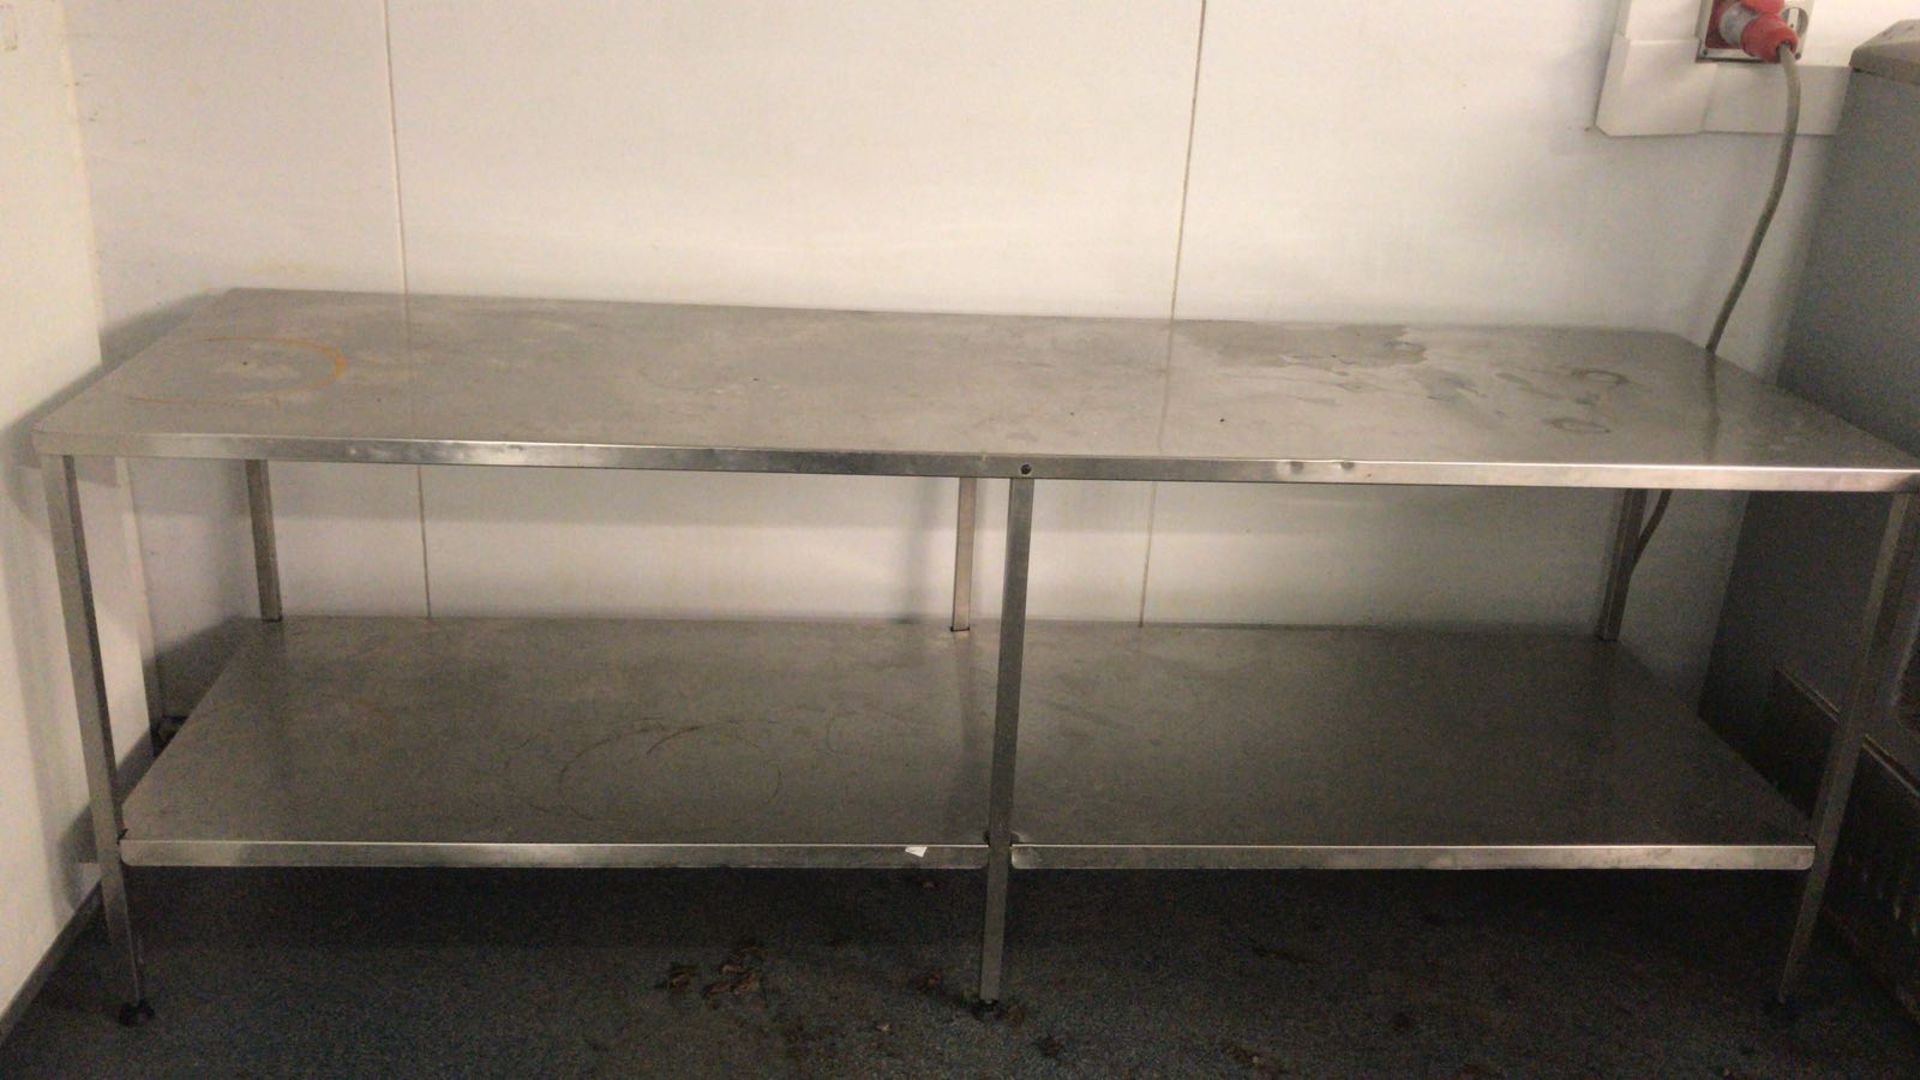 S/s table 2.1m x 700mm wide